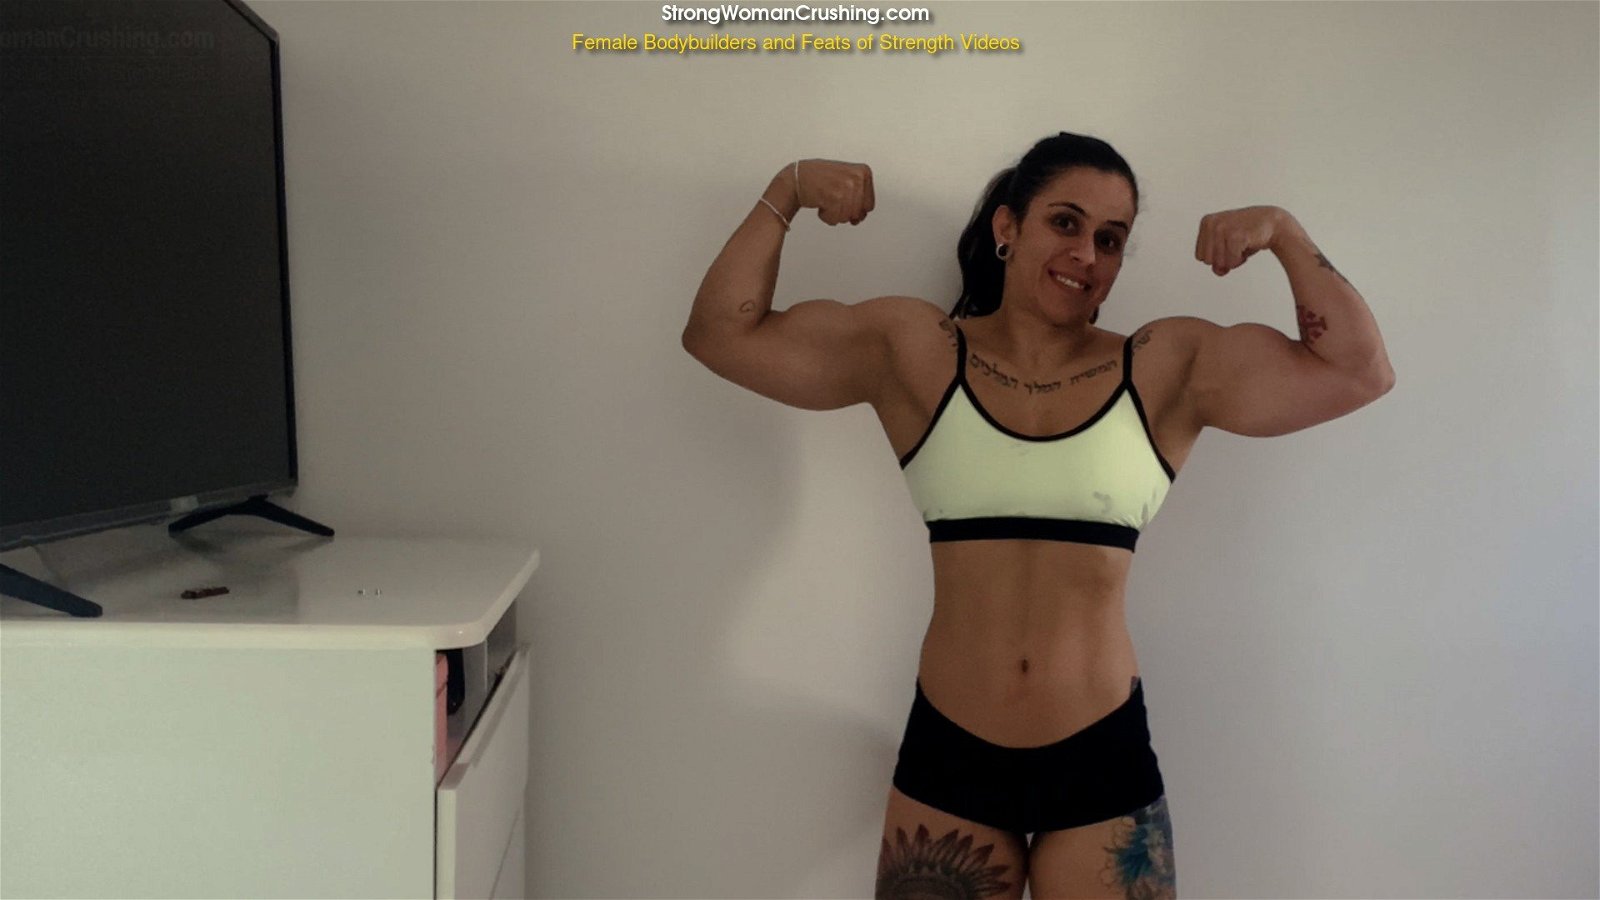 Photo by MusclegirlStrength with the username @MusclegirlStrength, who is a brand user,  April 16, 2024 at 8:49 PM and the text says 'Sassenach Crushes iPhone with Bulging Biceps!: StrongWomanCrushing.com

#musclegirl #musclegirllove #femalemuscle #femalemuscles #featsofstrength #powerfulwomen #musclesandtech #strengthoverphones'